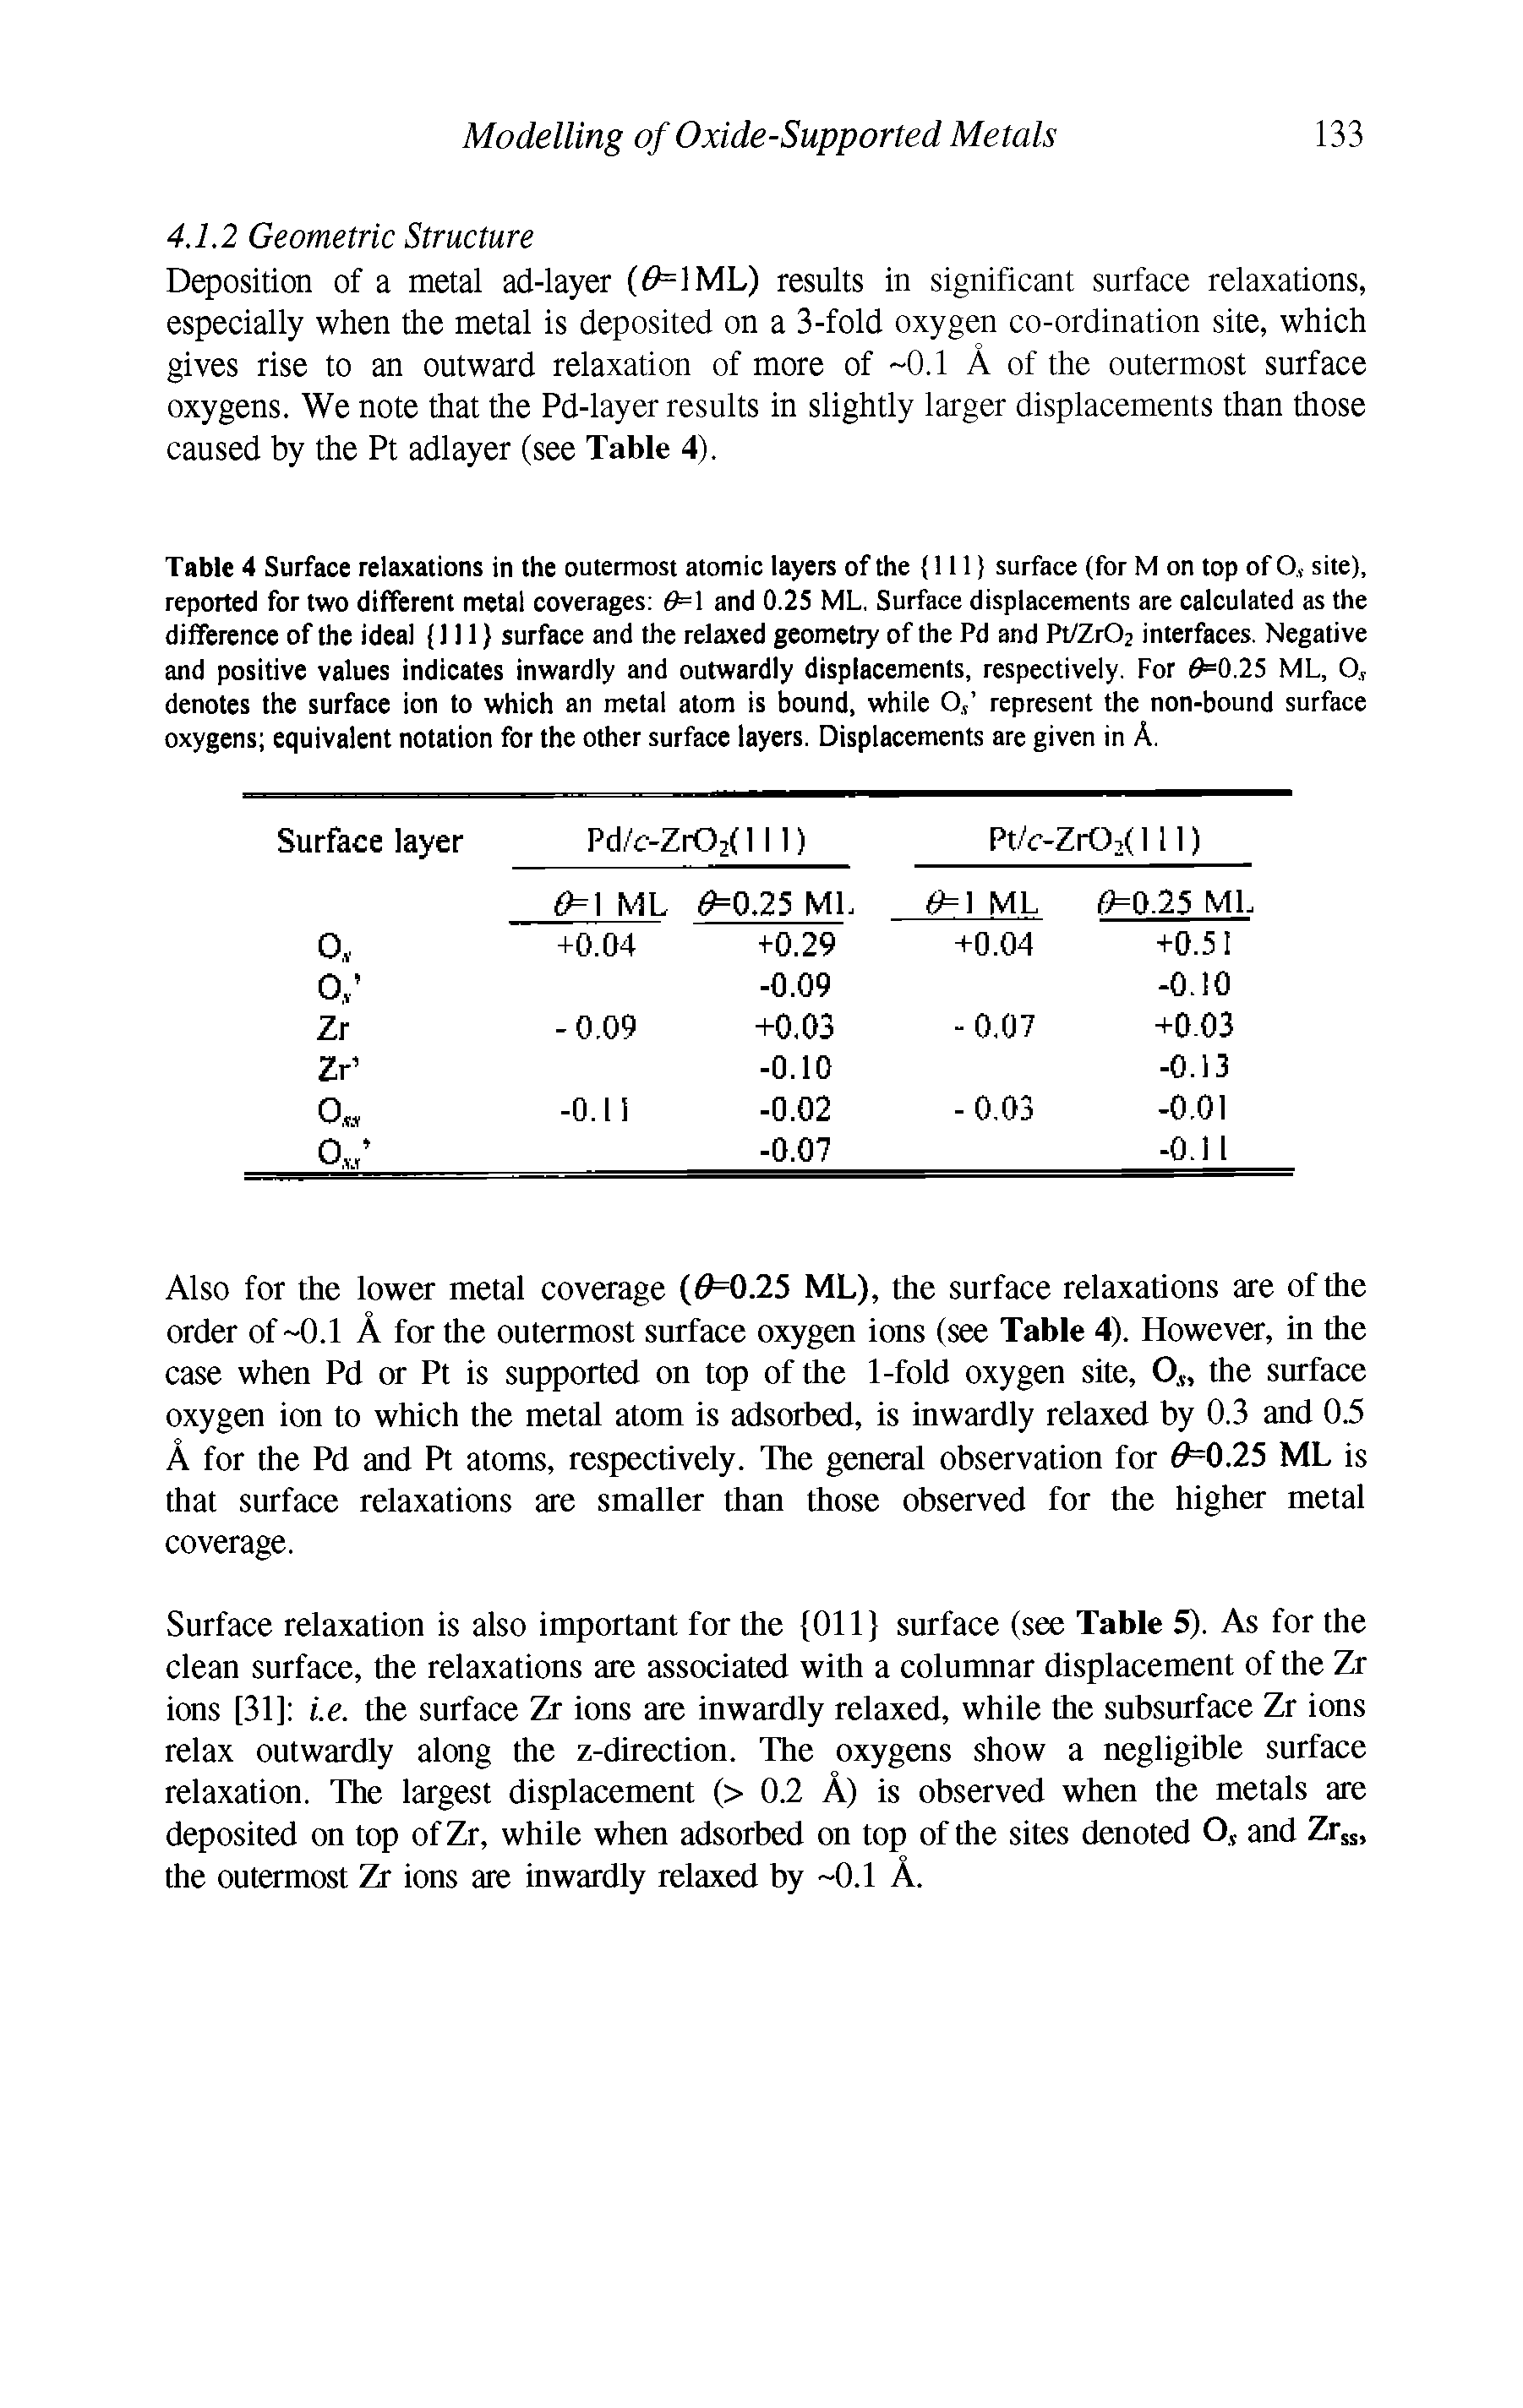 Table 4 Surface relaxations in the outermost atomic layers of the (111) surface (for M on top of O, site), reported for two different metal coverages 6= and 0.25 ML, Surface displacements are calculated as the difference of the ideal (111) surface and the relaxed geometry of the Pd and Pt/Zr02 interfaces. Negative and positive values indicates inwardly and outwardly displacements, respectively. For 0=0.25 ML, O., denotes the surface ion to which an metal atom is bound, while Oj represent the non-bound surface oxygens equivalent notation for the other surface layers. Displacements are given in A.